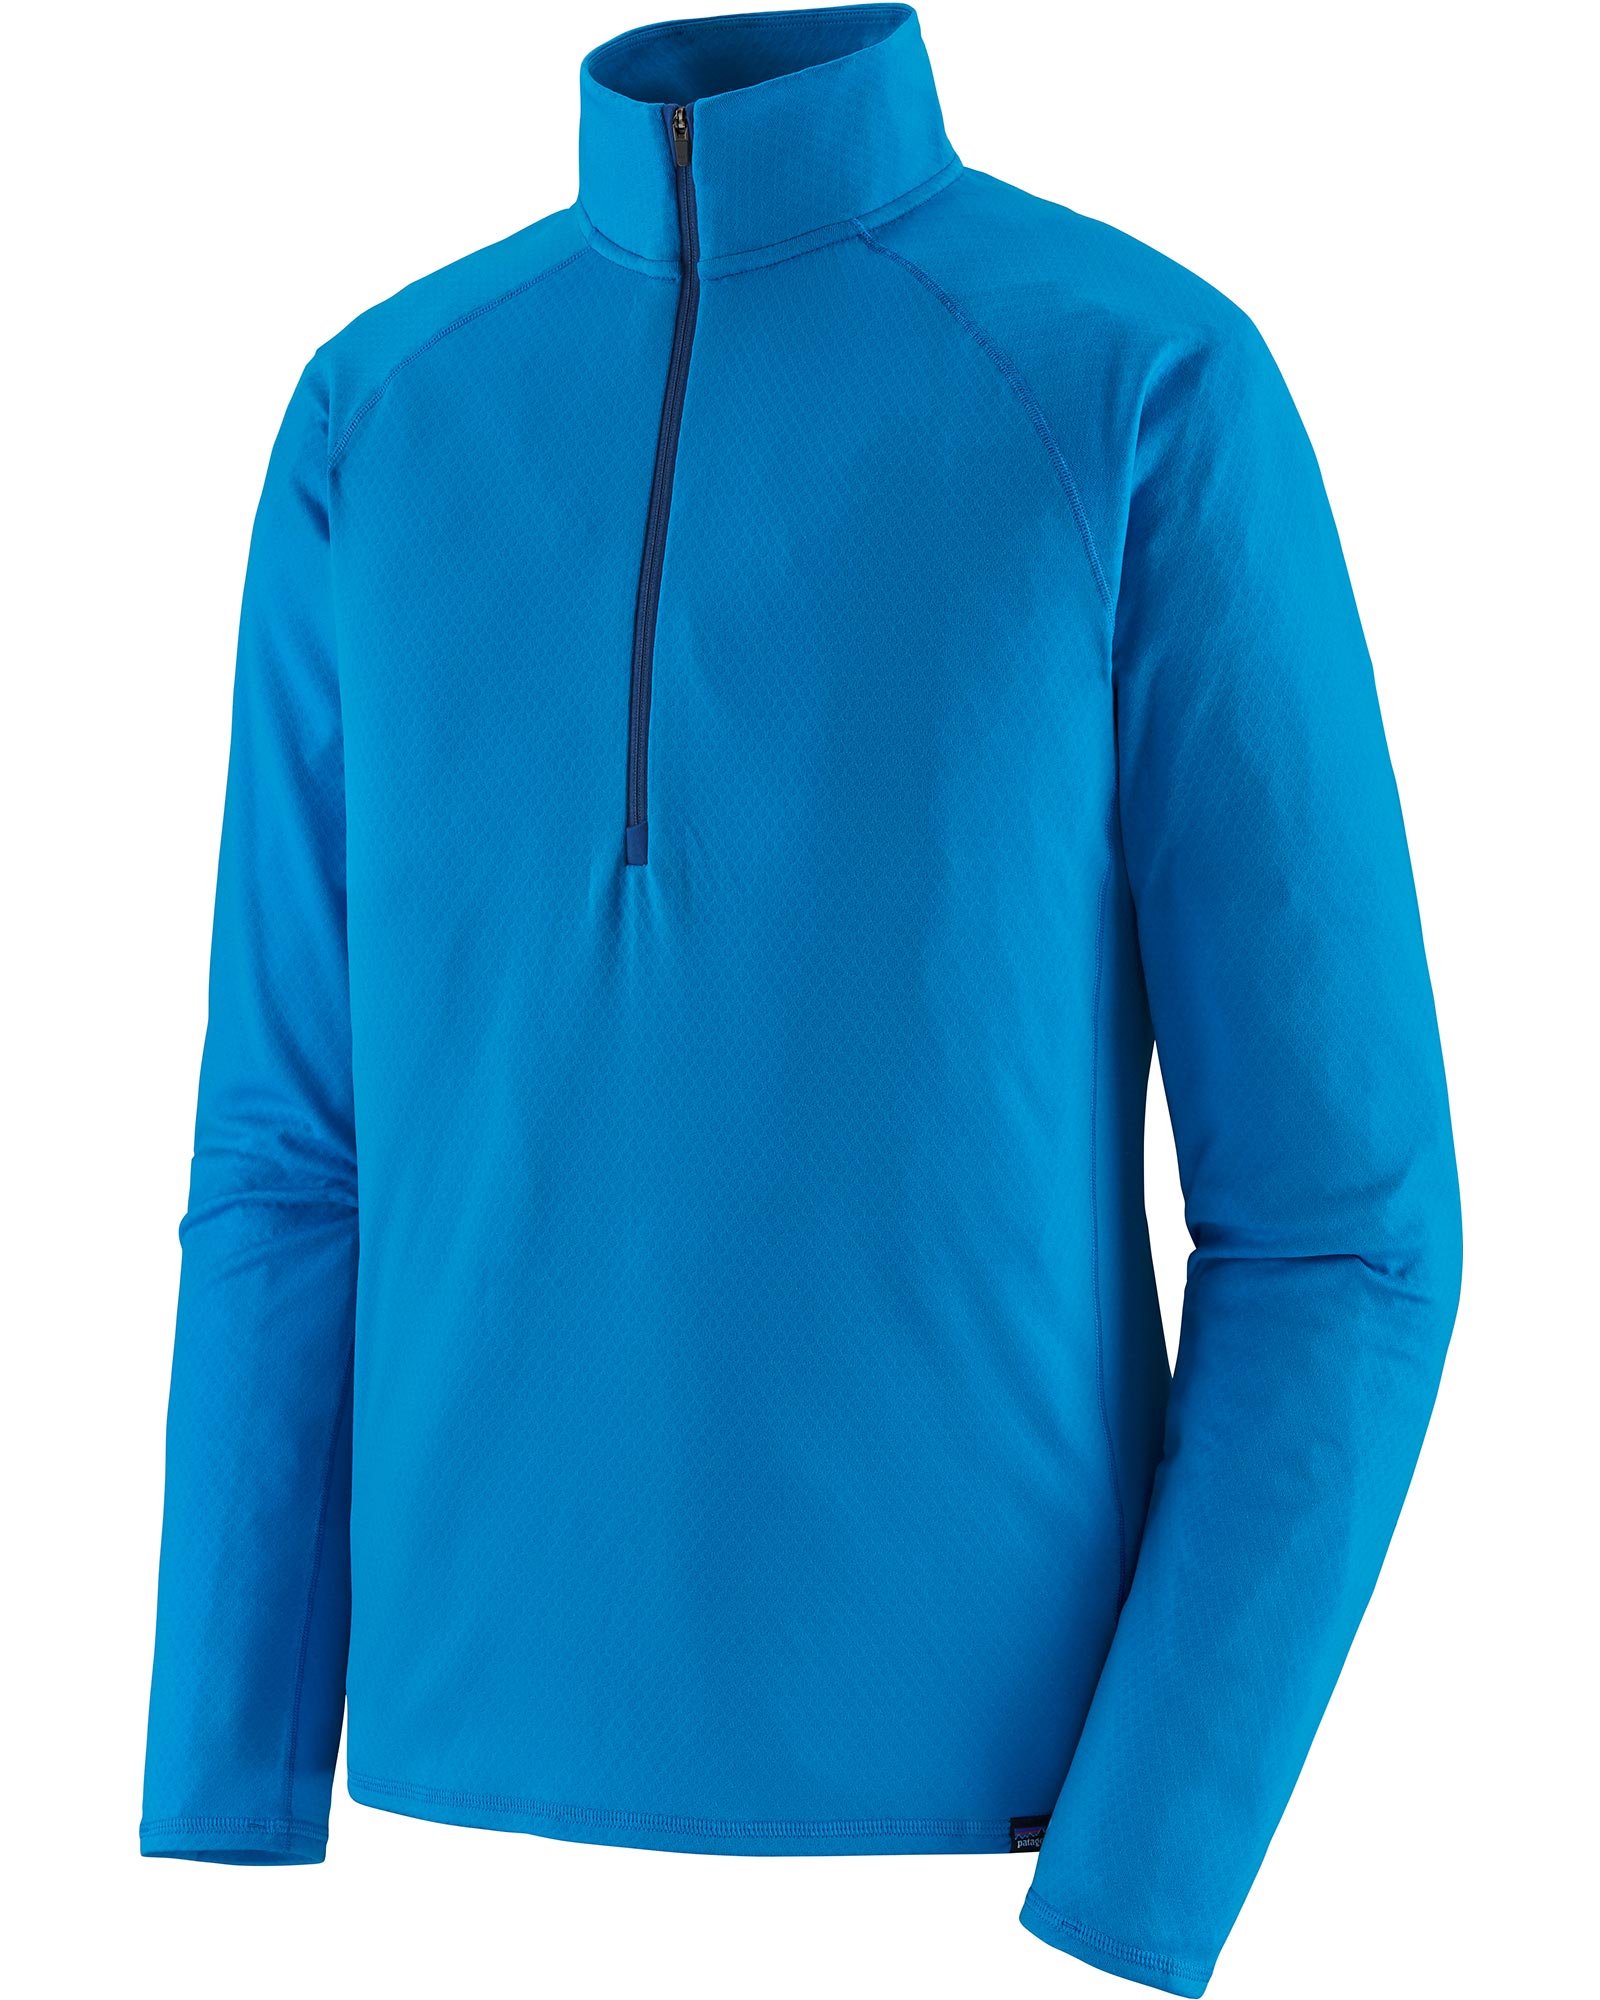 Patagonia Capilene Men’s Midweight Zip Neck - Andes Blue XL